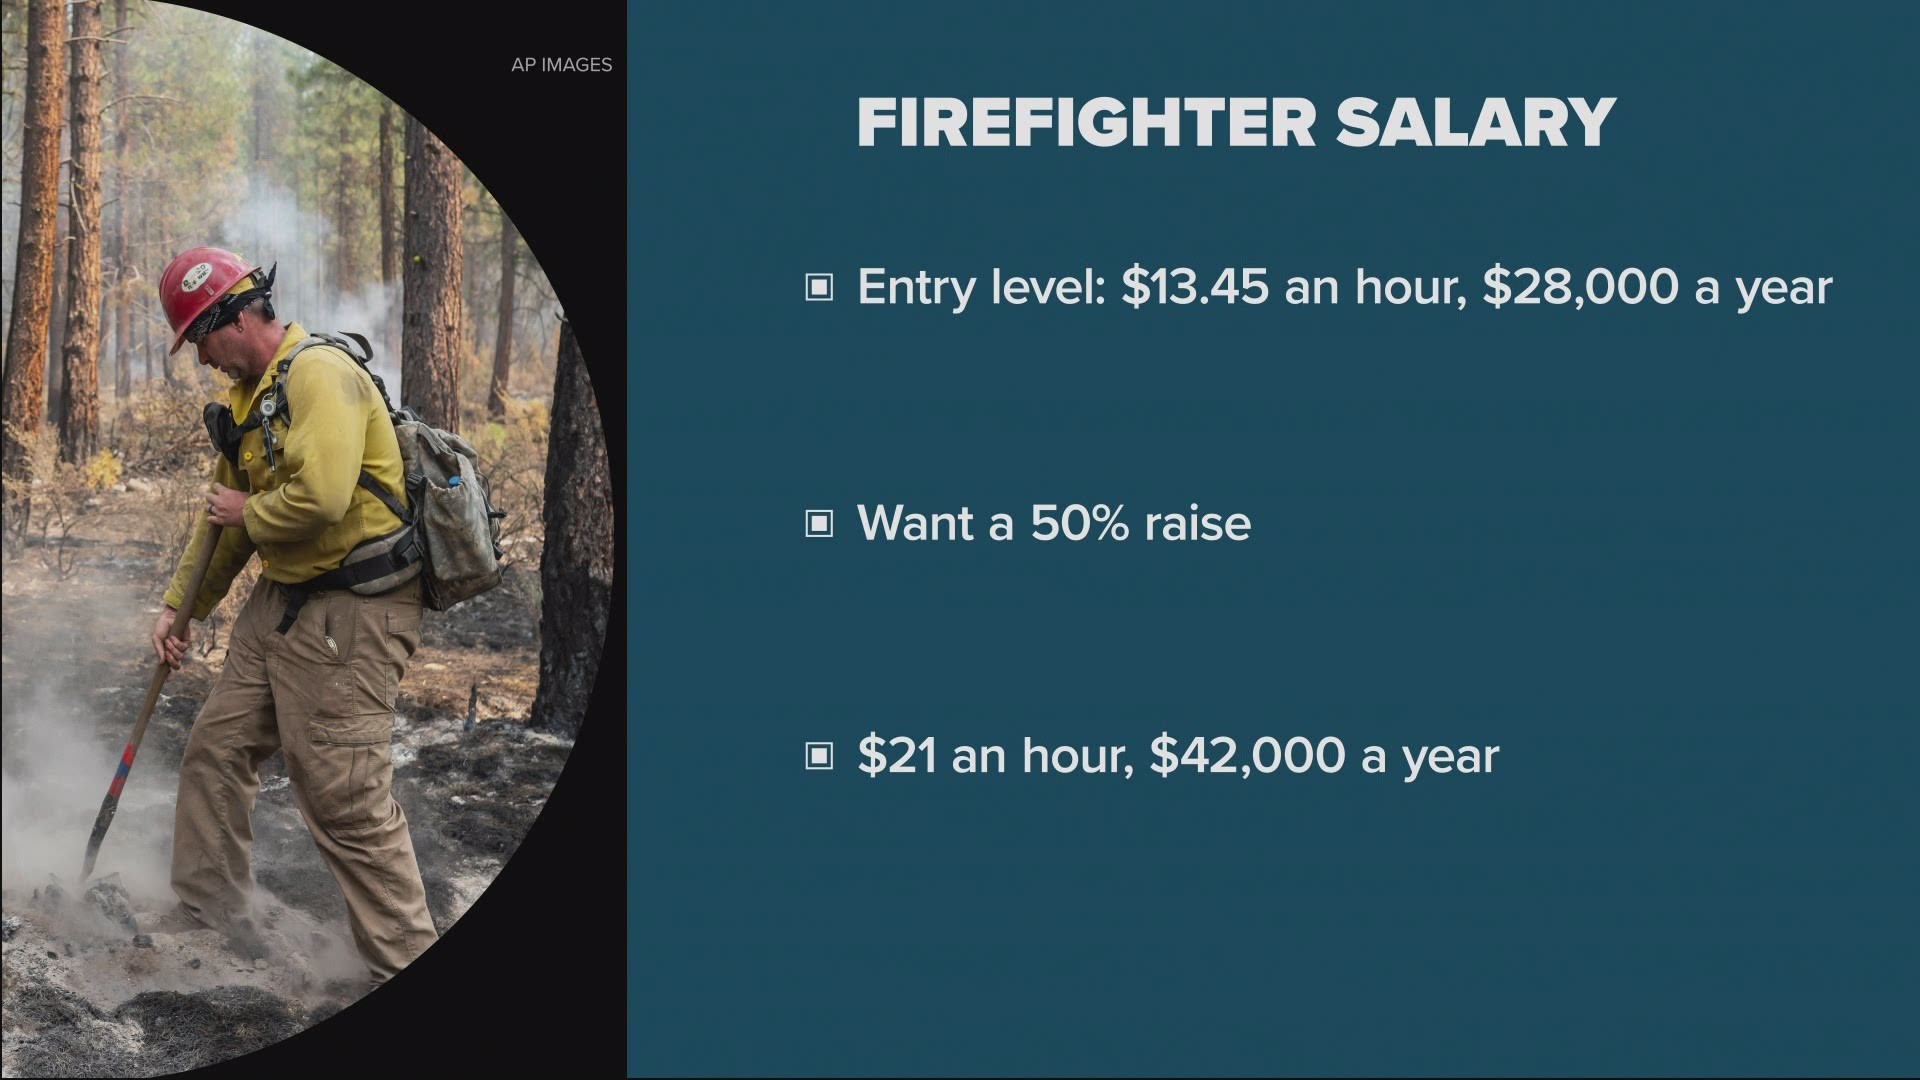 Wildland firefighters looking for better pay